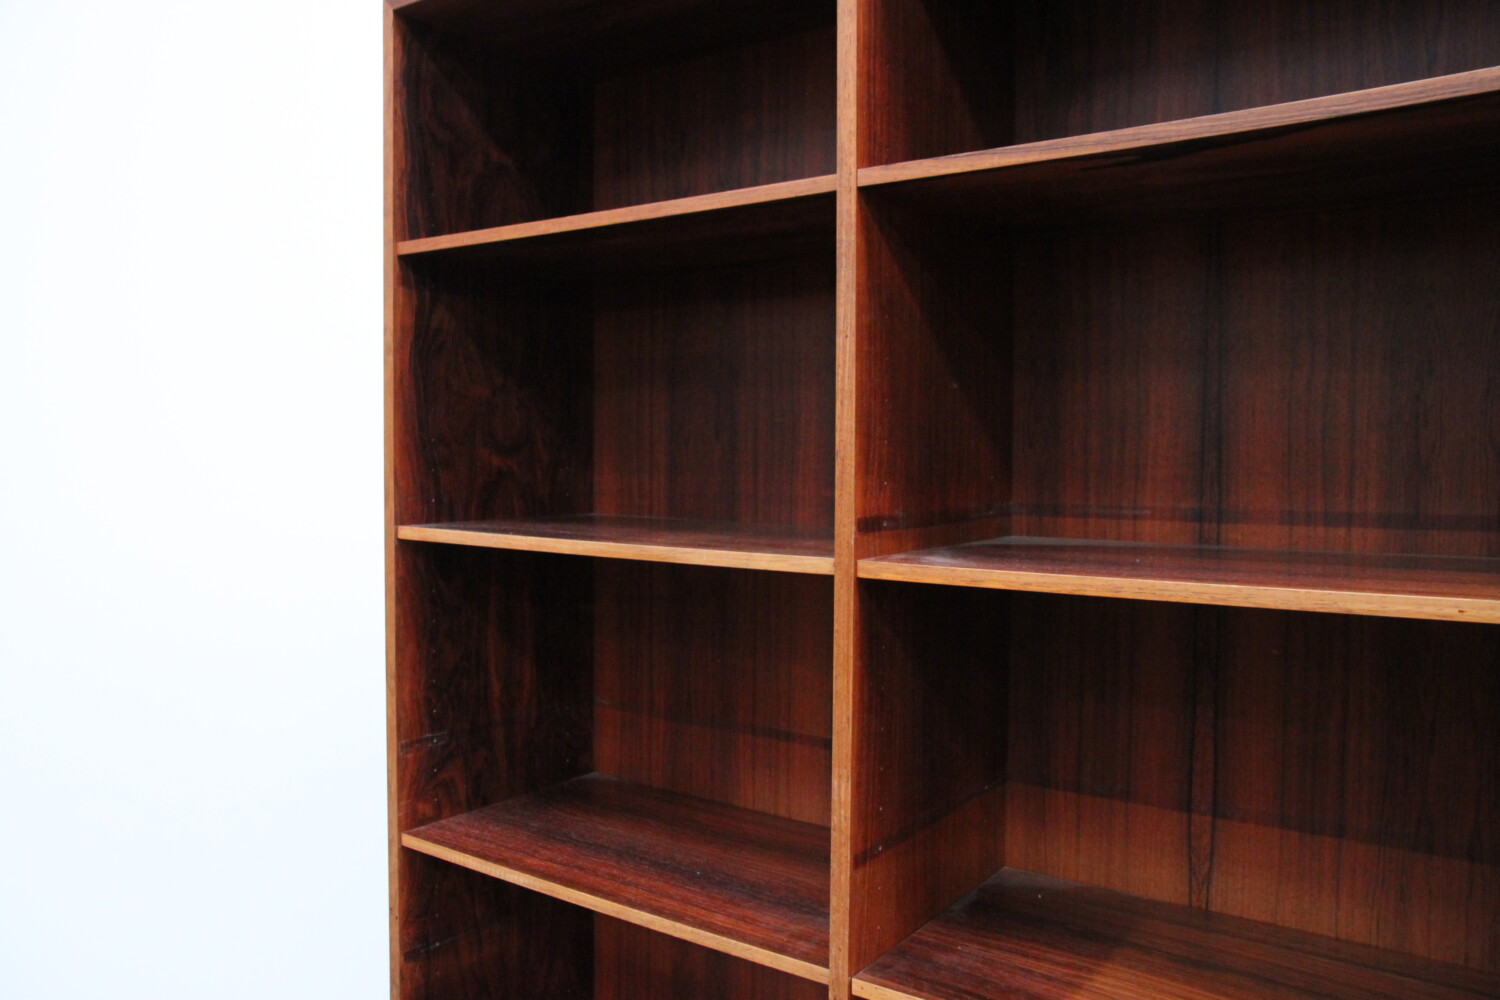 Rosewood Bookcase by Poul Hundevad sold